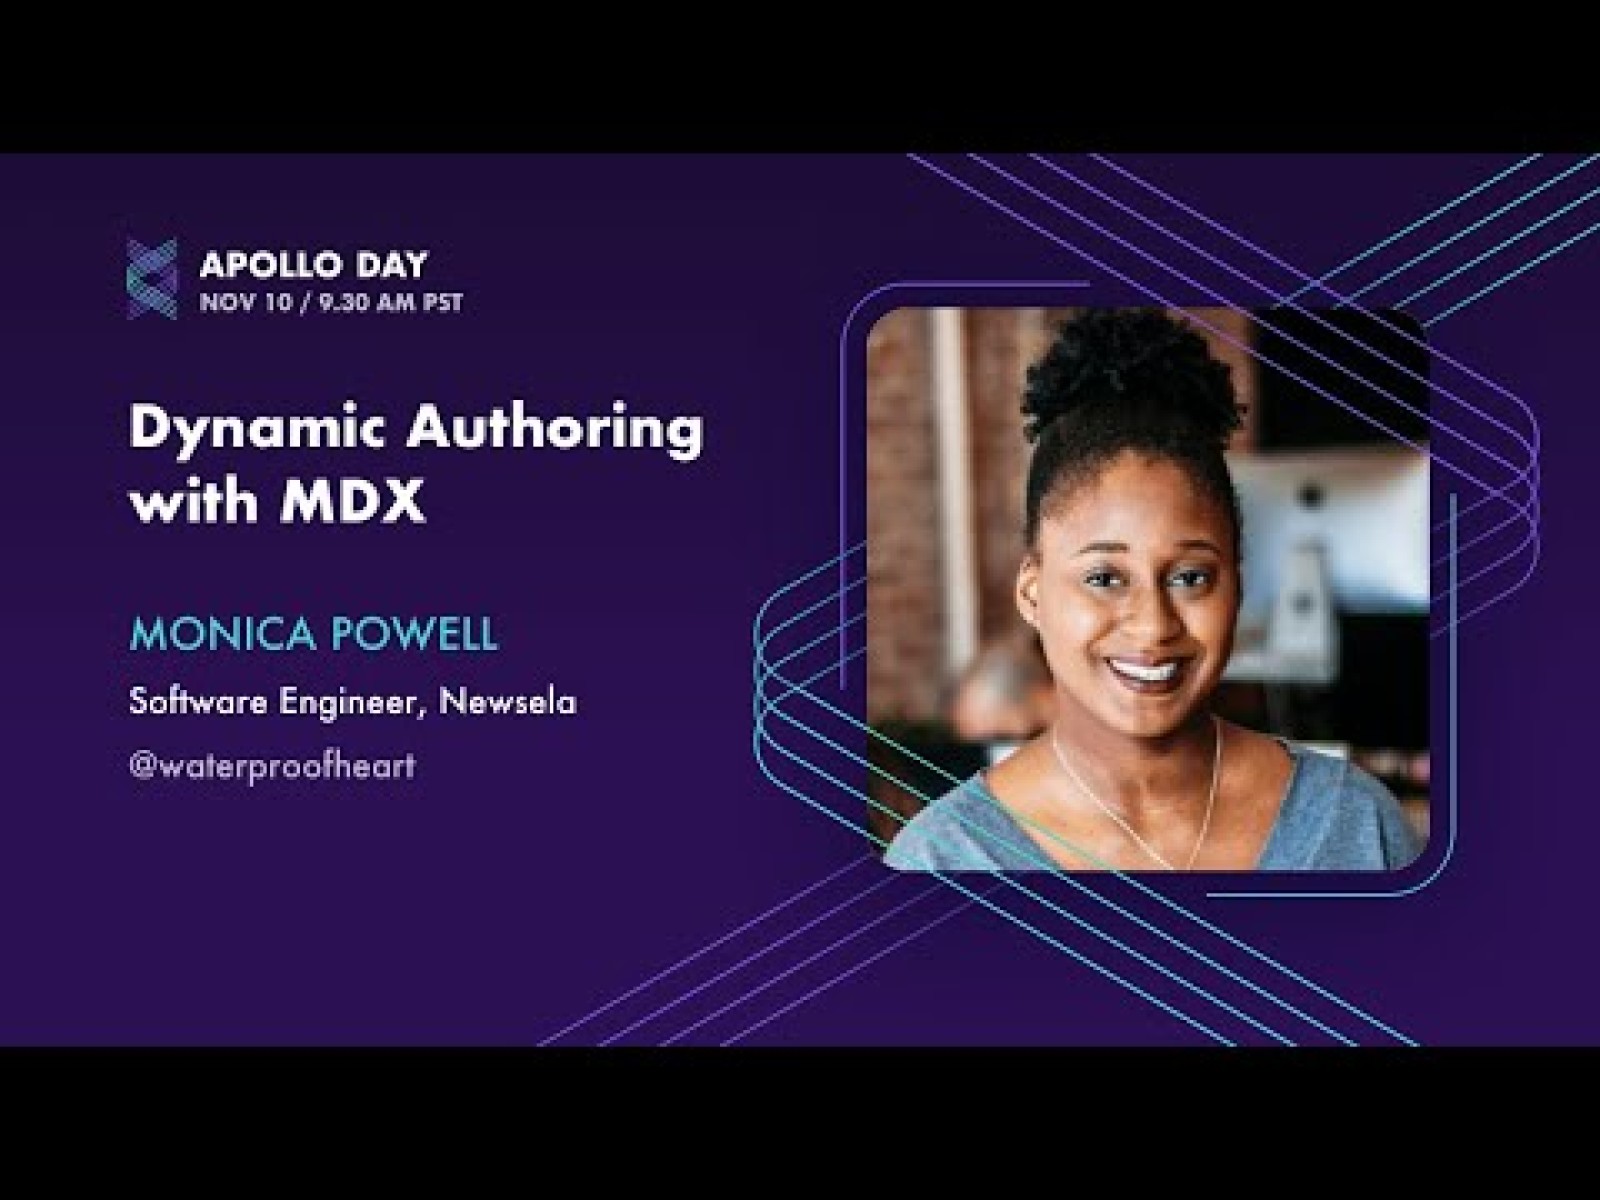 Dynamic Authoring with MDX by Monica Powell